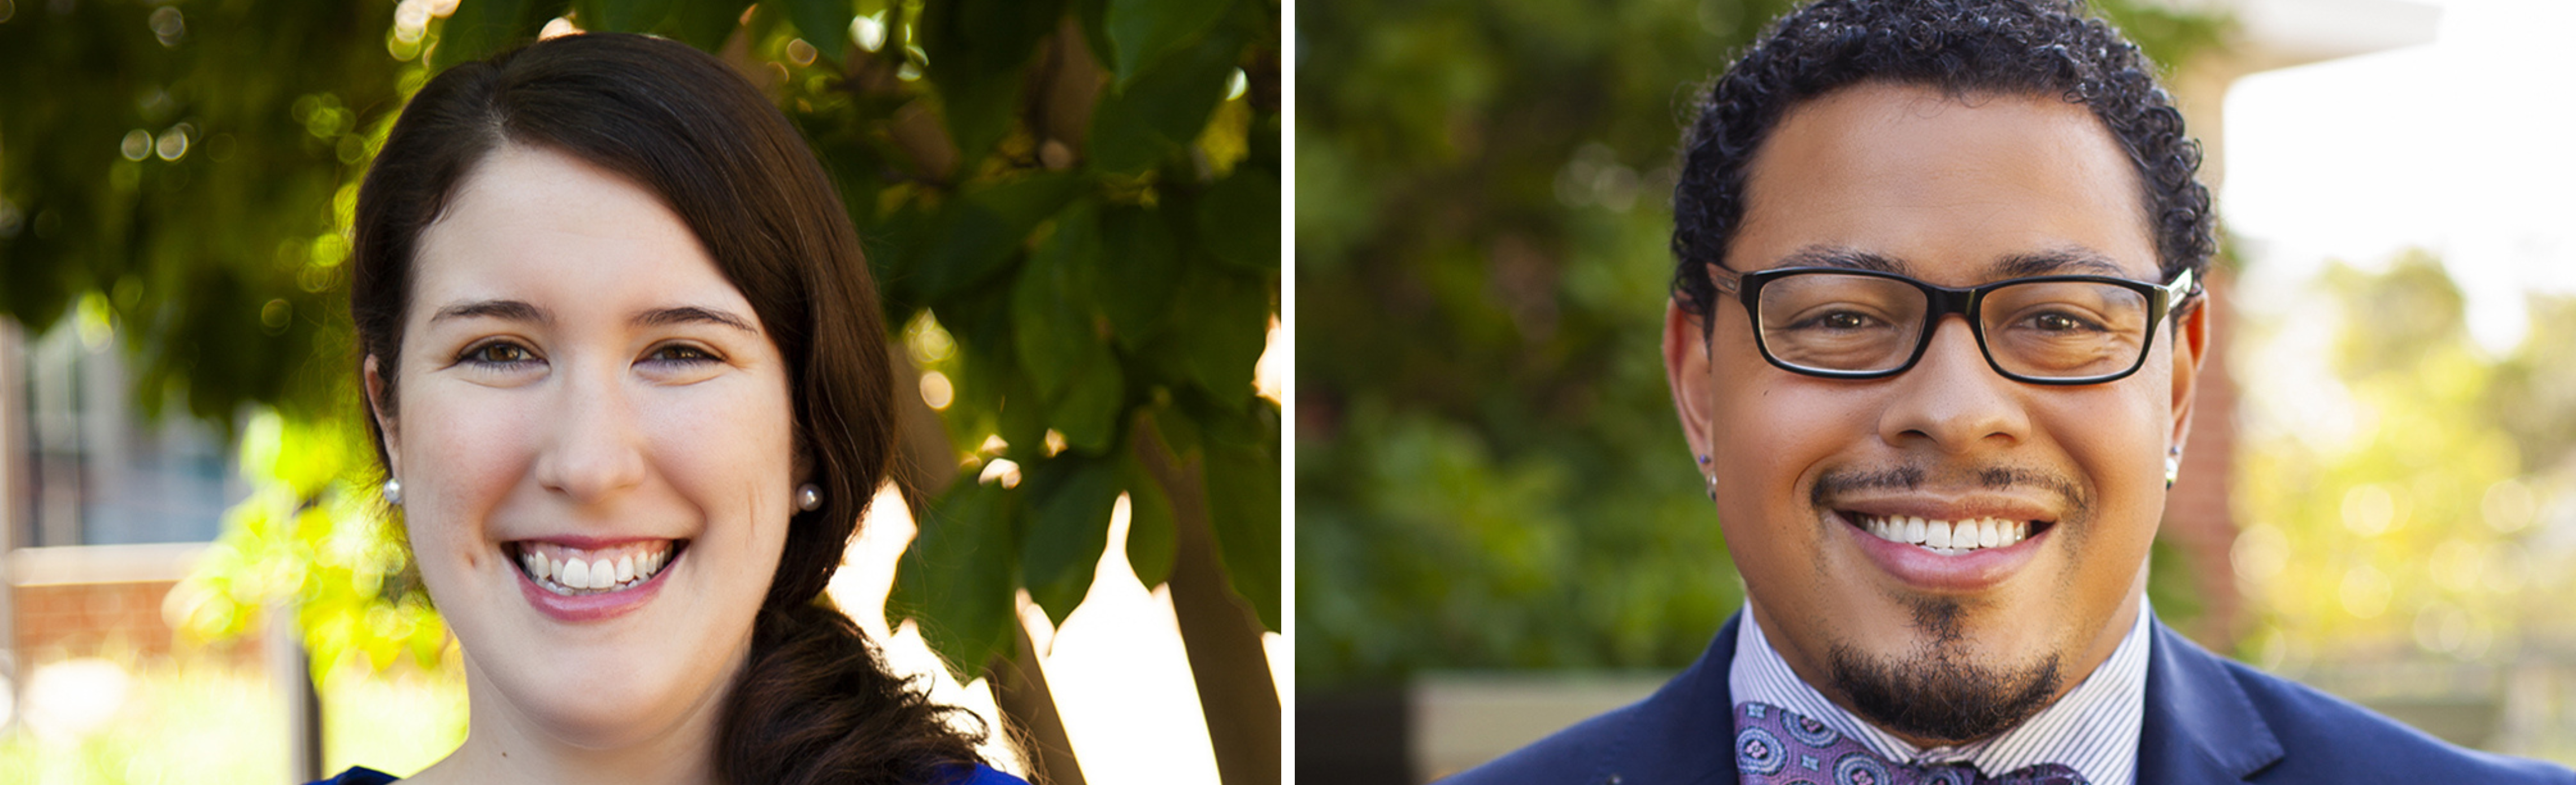 Two separate photos of a man and women smiling in front of trees.